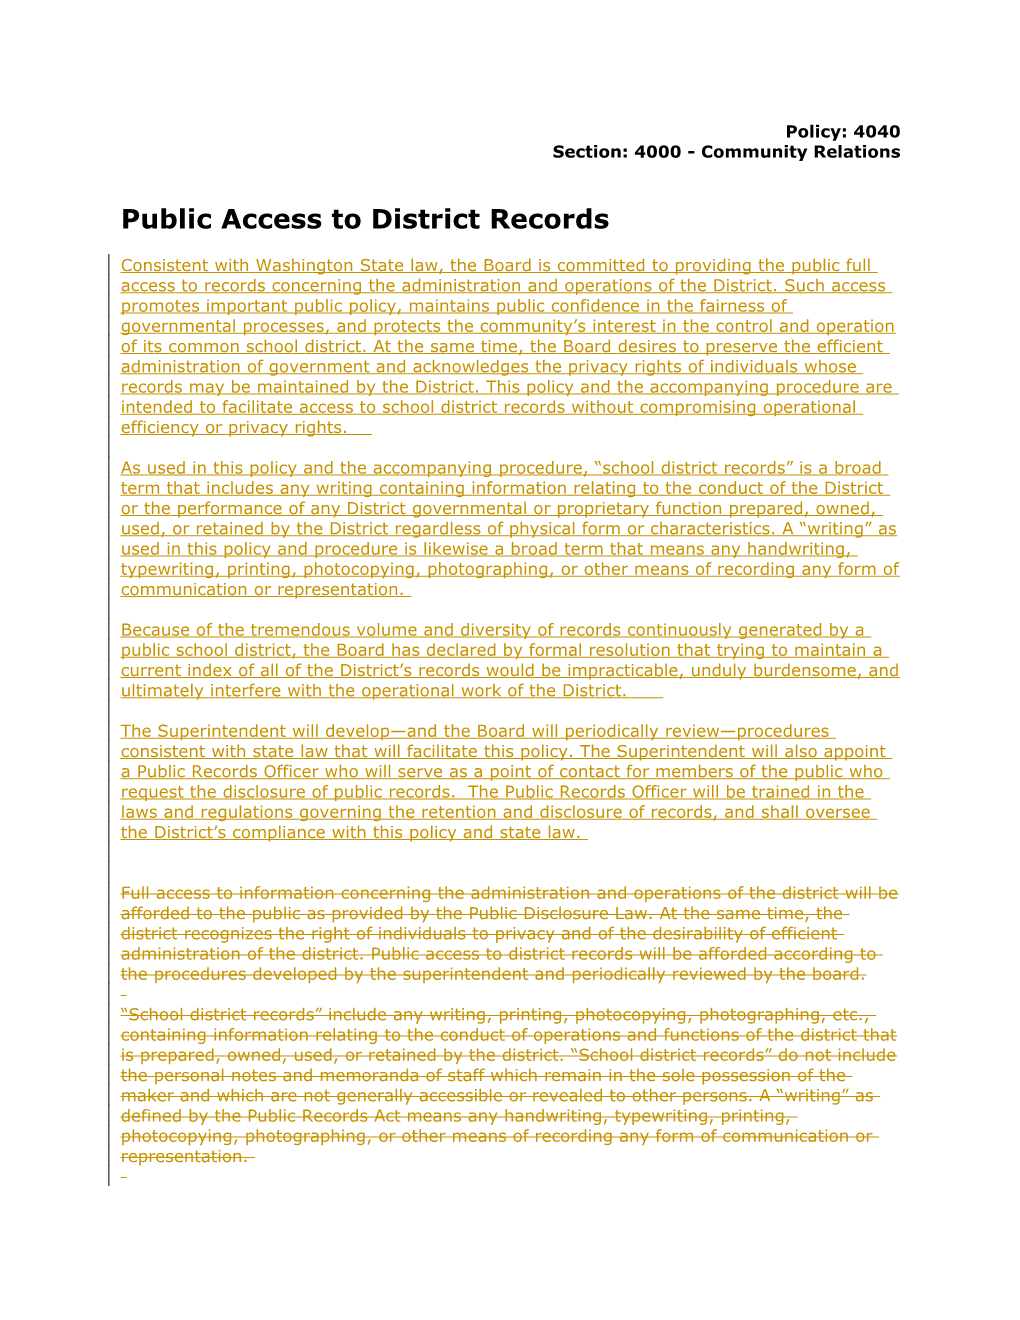 Public Access to District Records